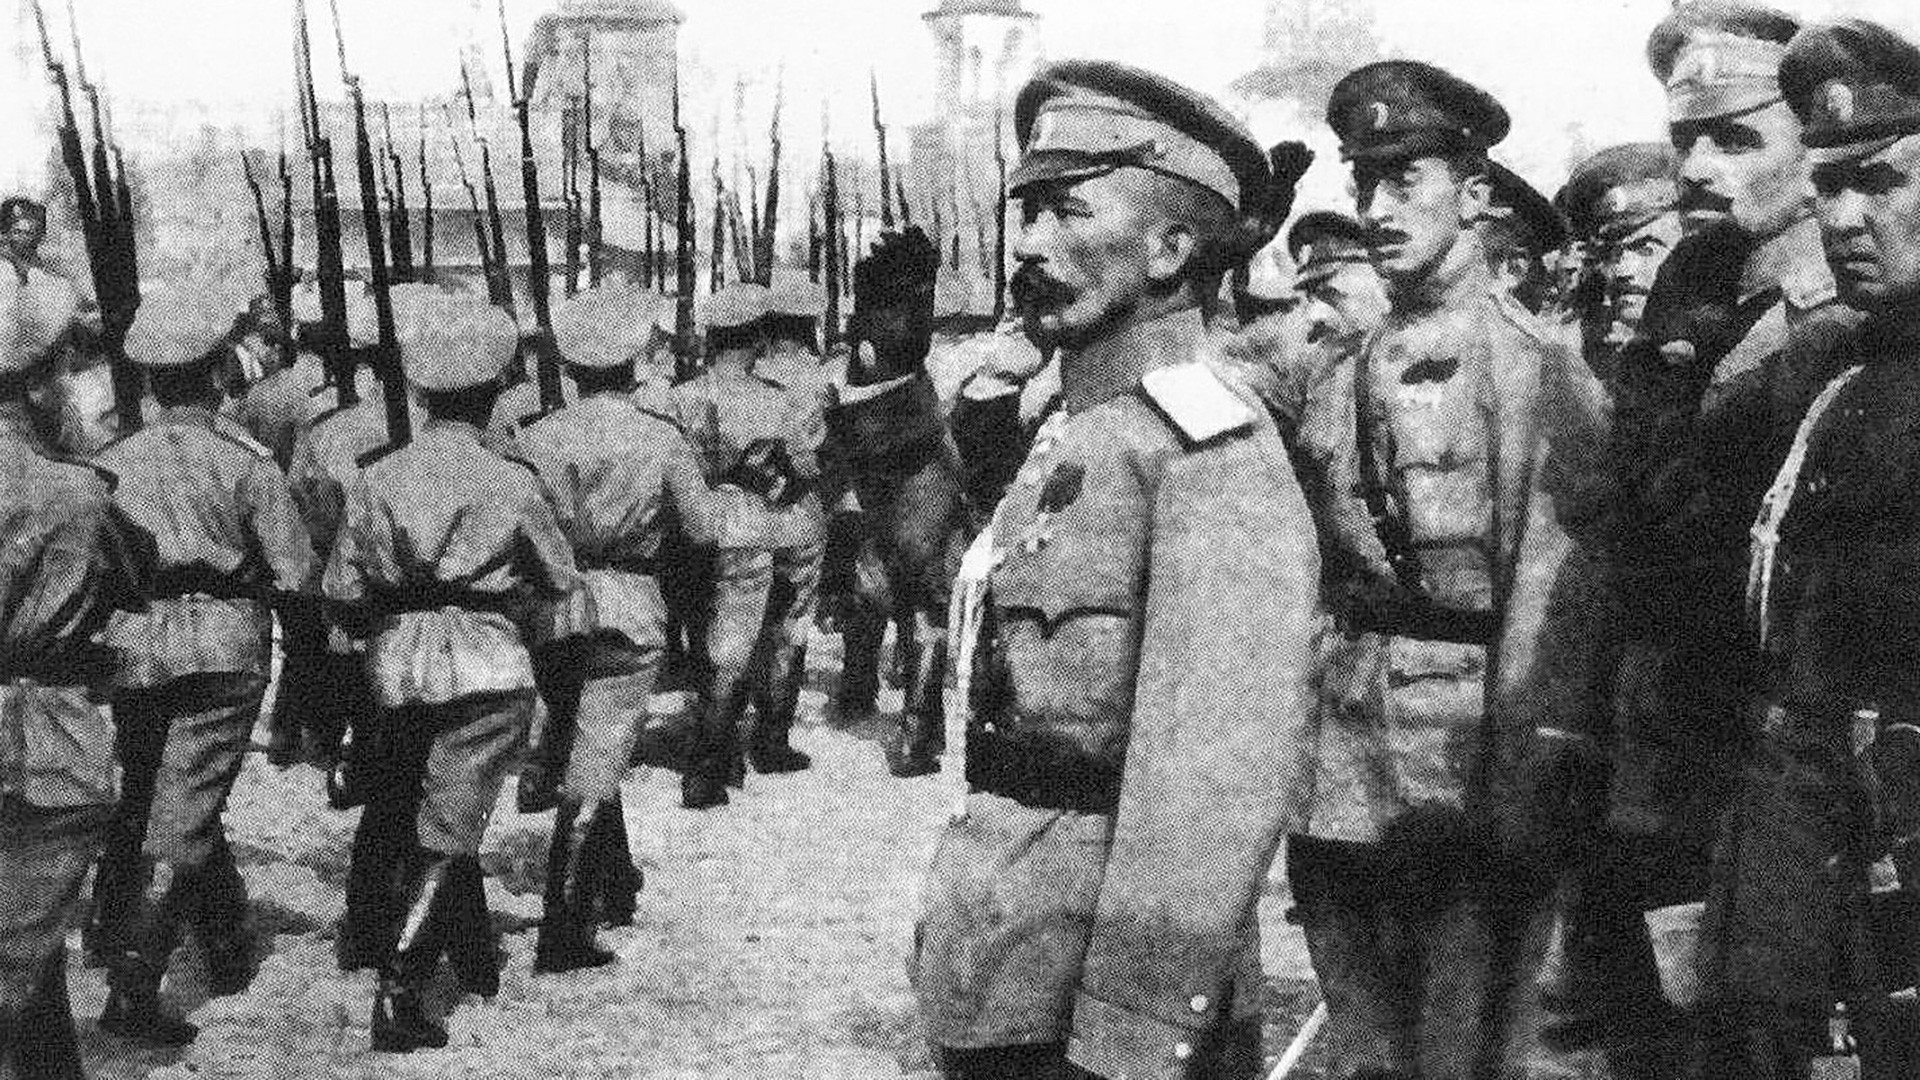 The Kornilov affair How the military’s last attempt to stop revolution